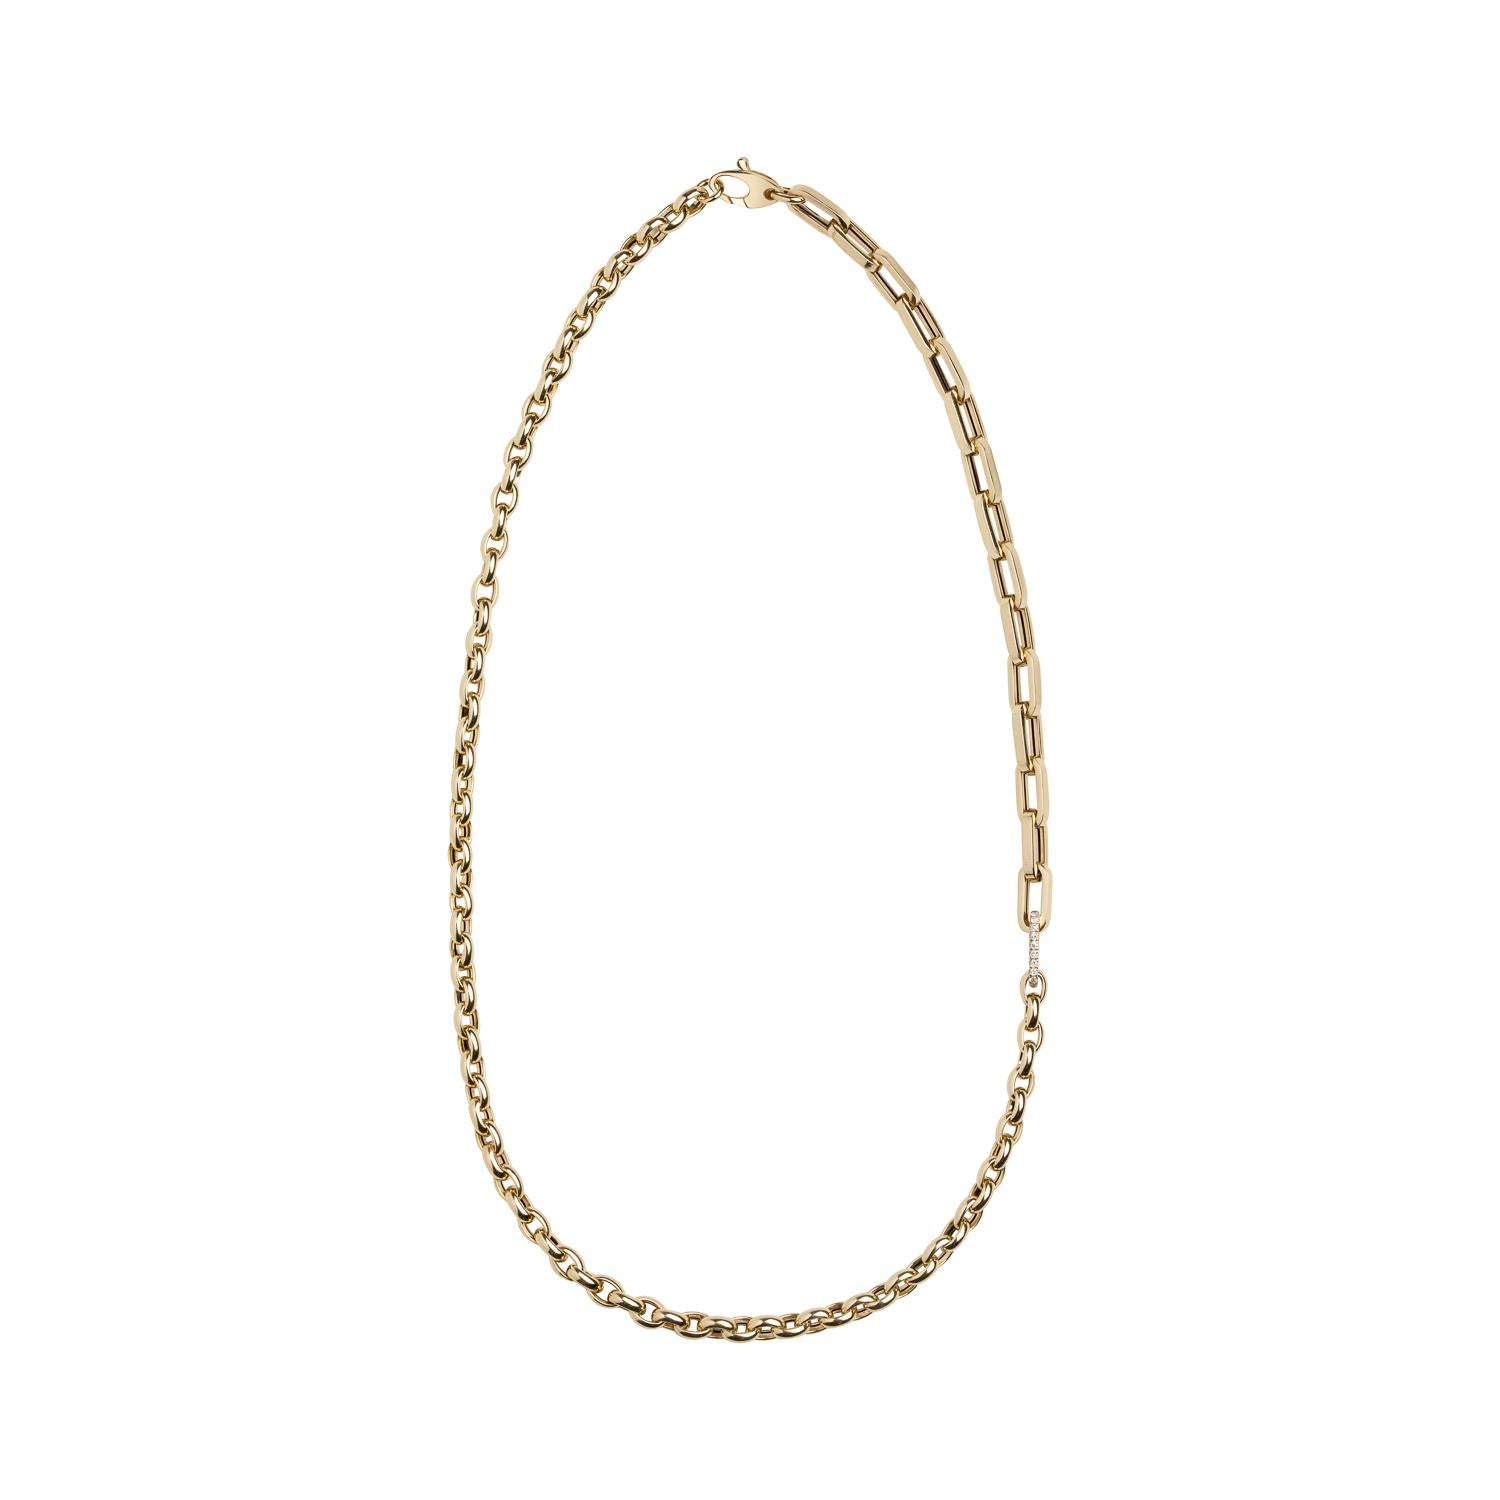 Wear our versatile Tilda 4-in-1 as a longer necklace, choker necklace, single bracelet or wraparound bracelet, with a removable diamond clasp that you can add charms to. 

Two lengths: 21.5'' or 22'' 
We recommend 21.5'' for those with daintier